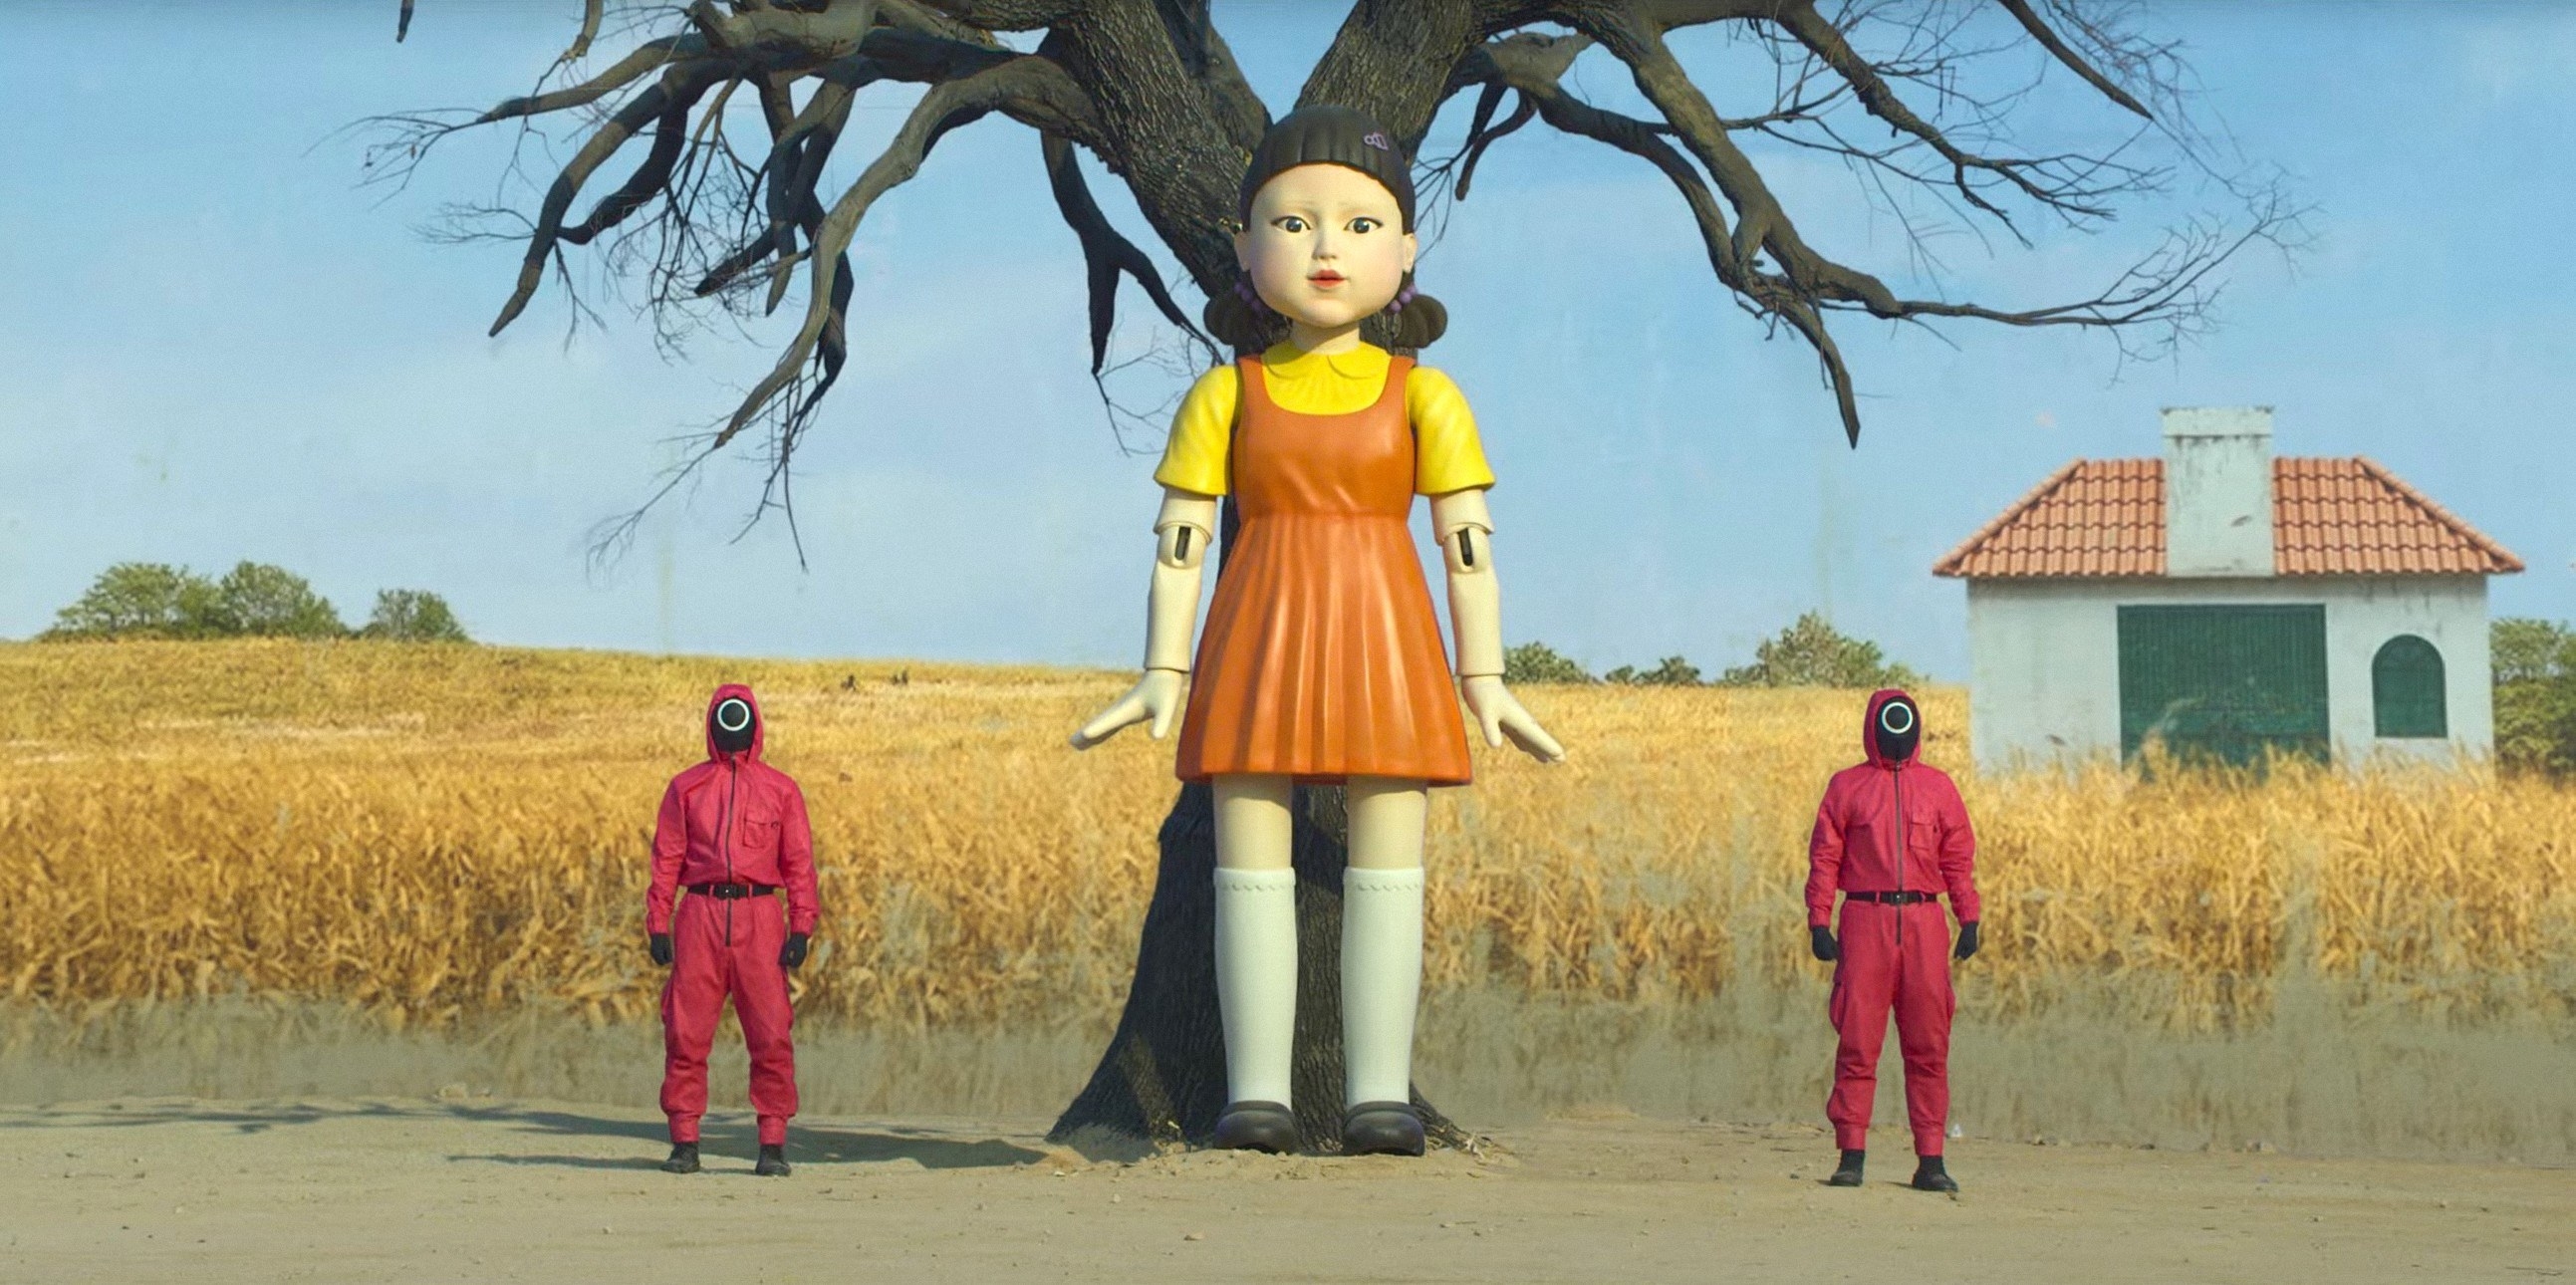 Two guards stand next to a giant doll